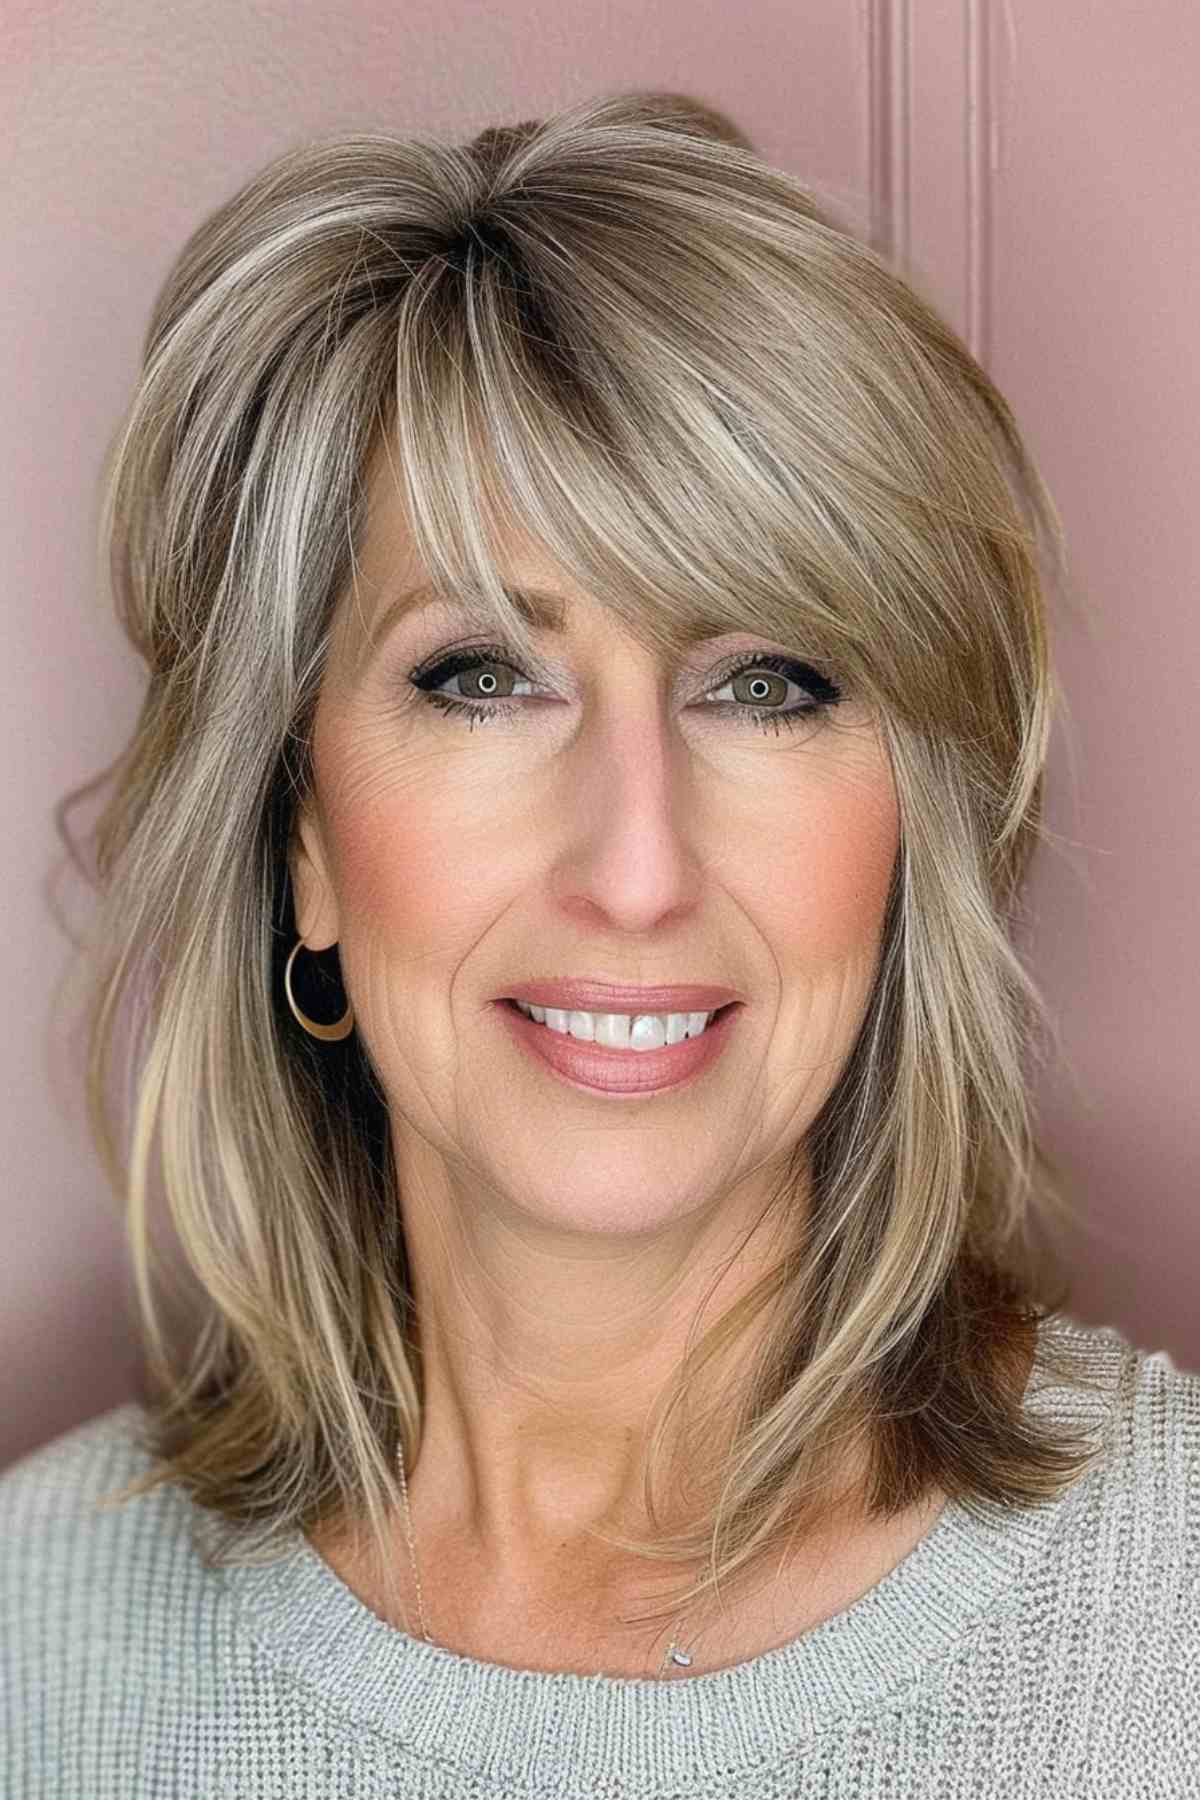 Smiling mature woman with soft layered bangs, blending into a mid-length hairstyle with natural highlights.